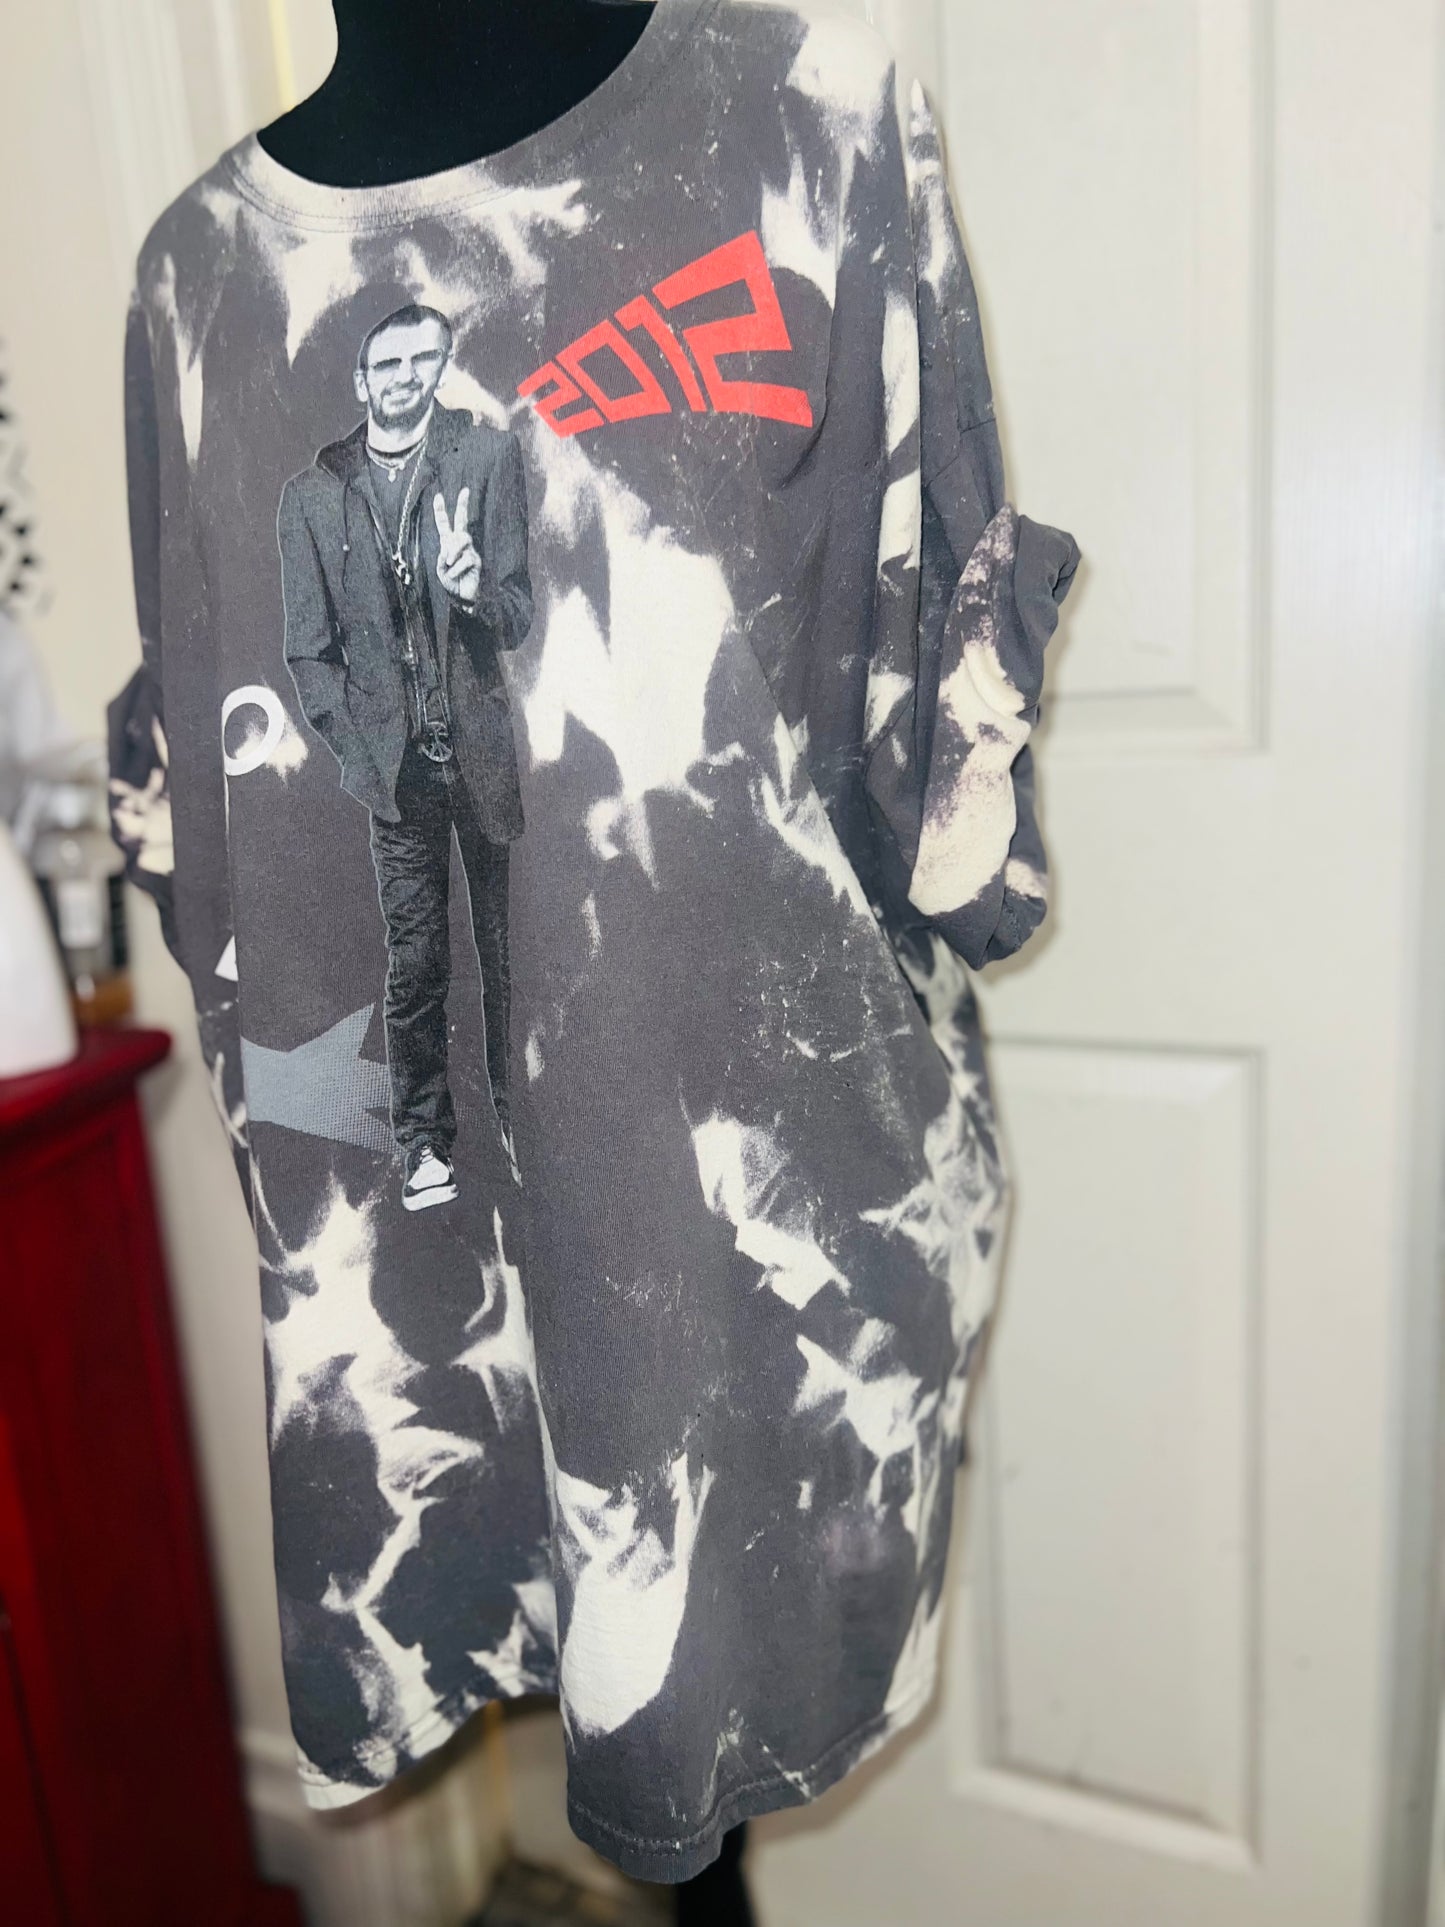 Bleached Ringo Starr Vintage Double Sided Tee